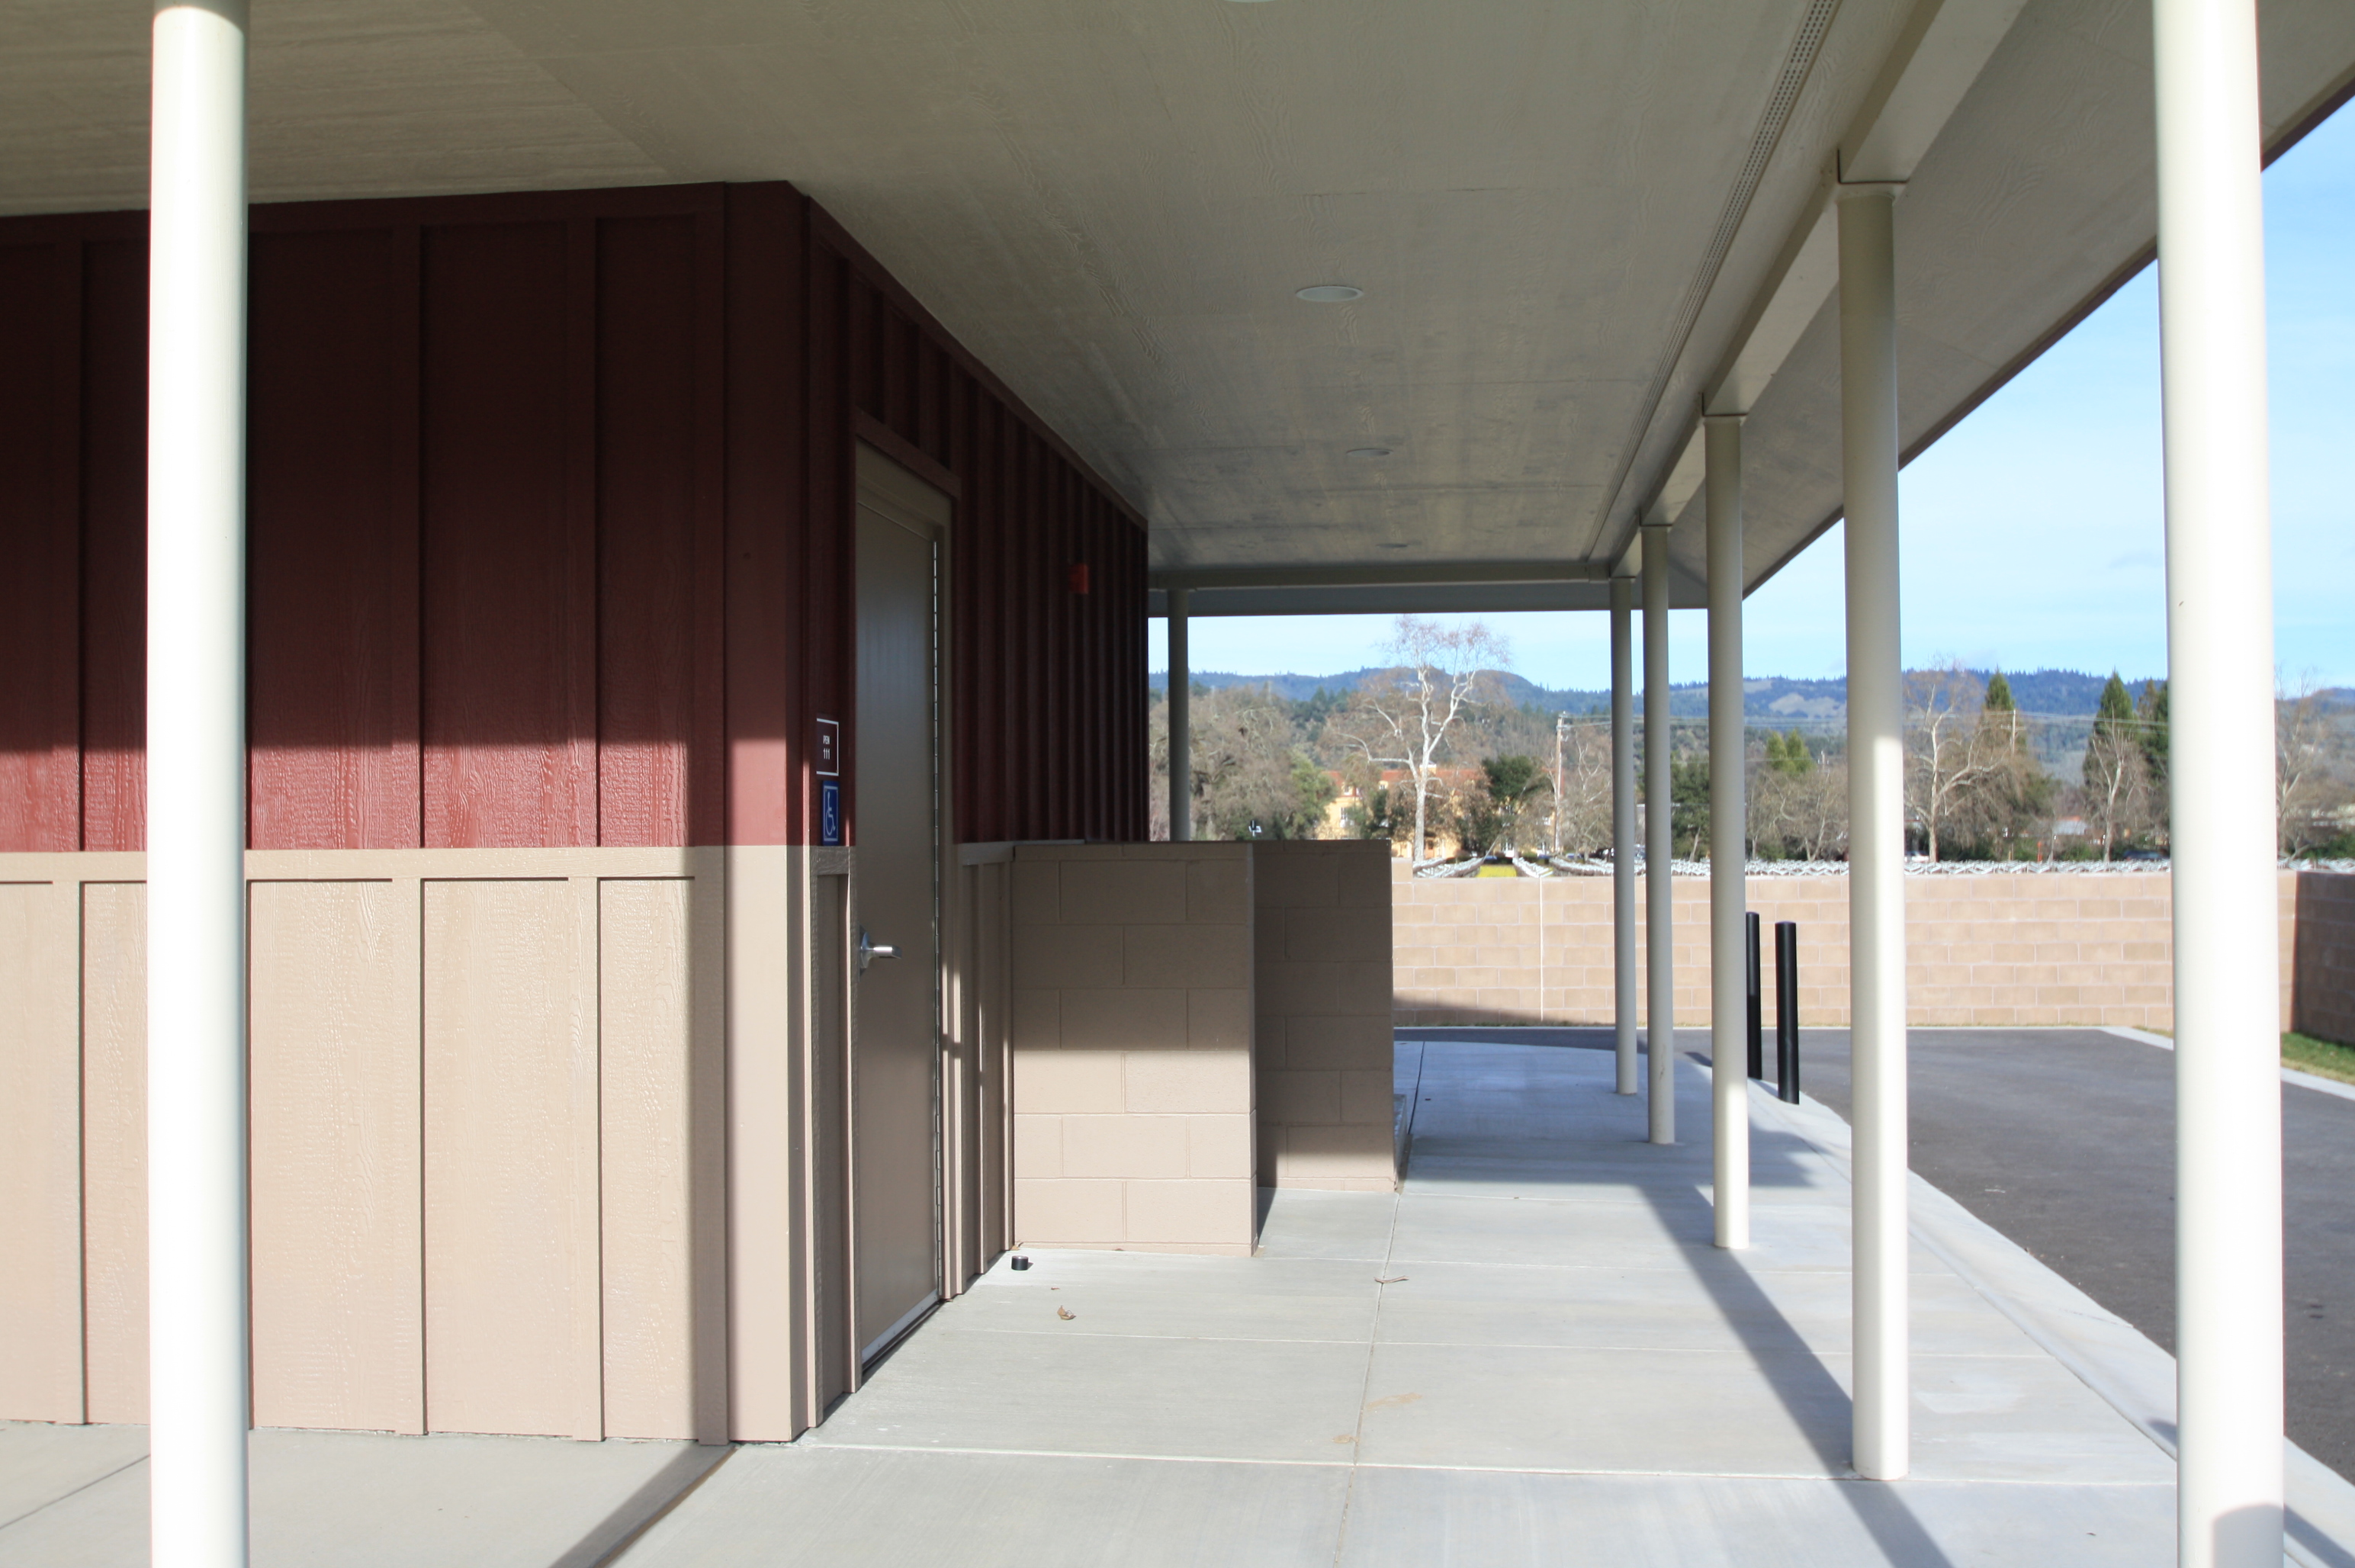 St. Helena High School Agriculture & Culinary Arts Building Renovations